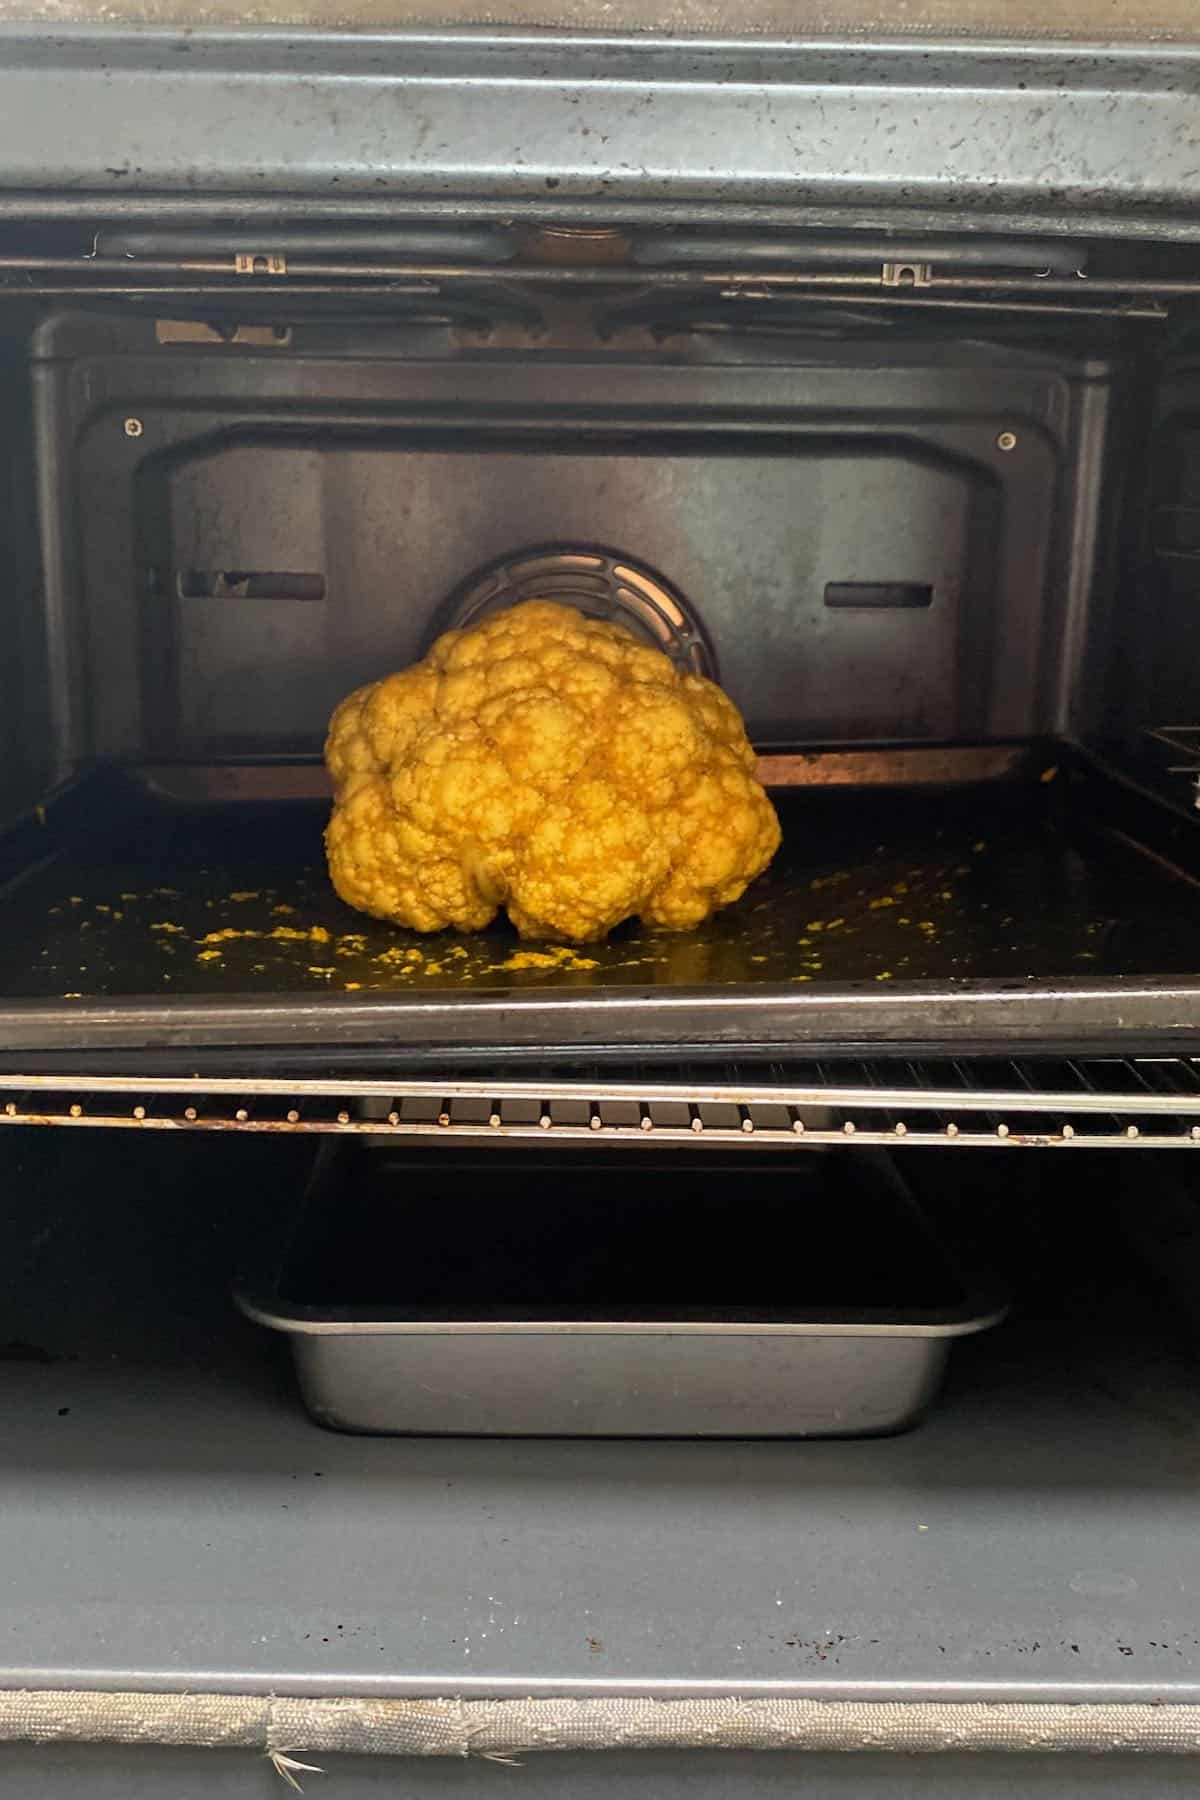 Cauliflower in the oven with a small tray under it